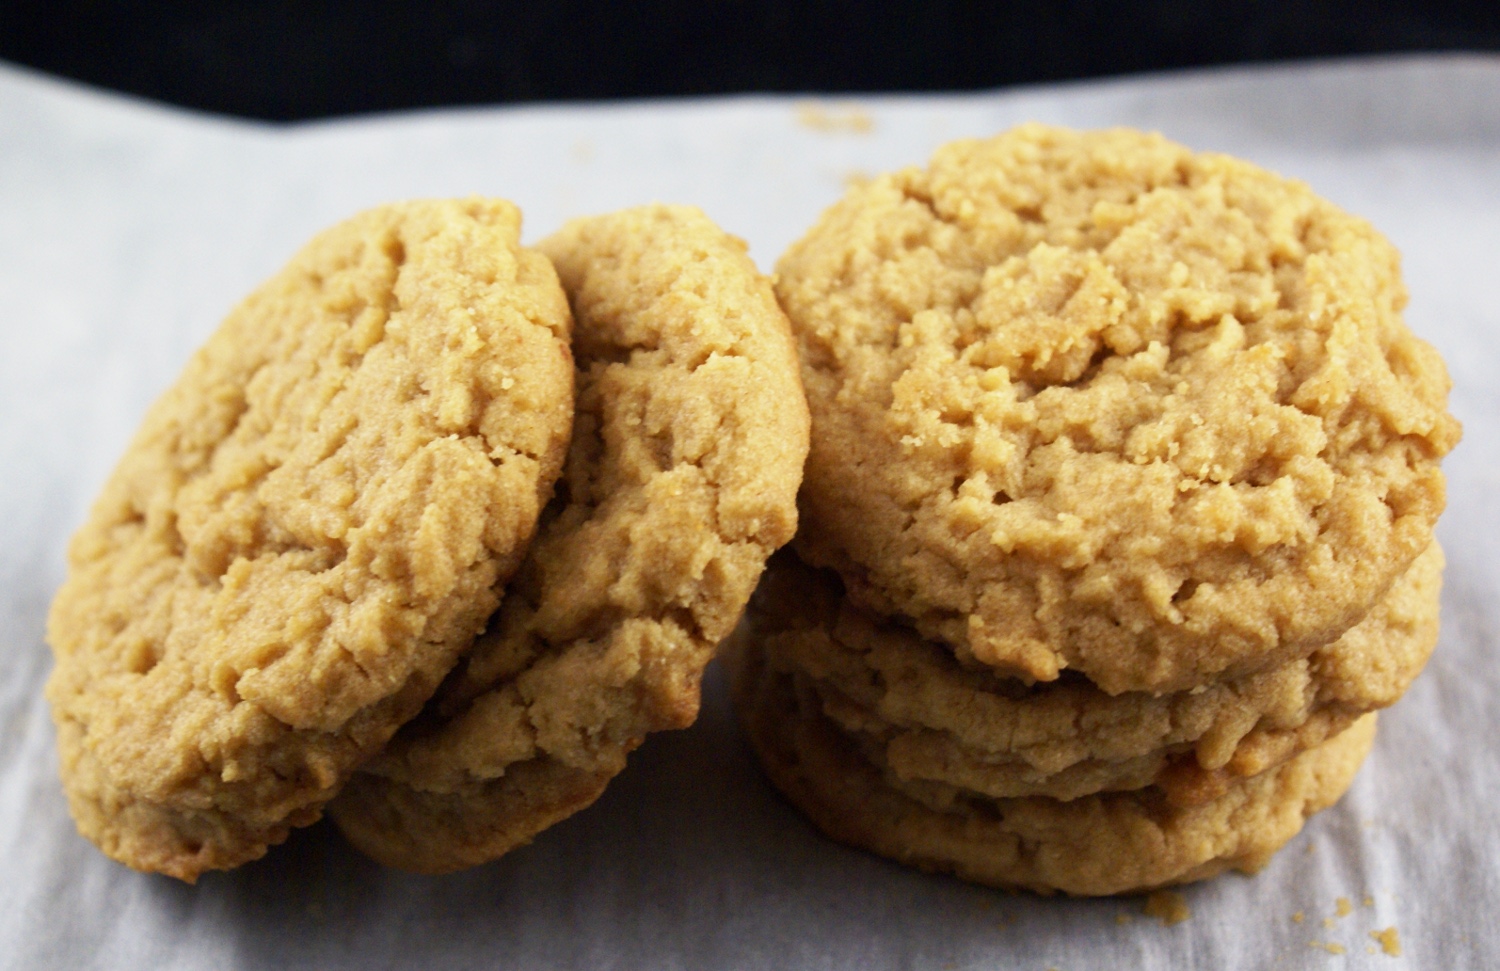 MRS. FIELD'S SOFT AND CHEWY PEANUT BUTTER COOKIES